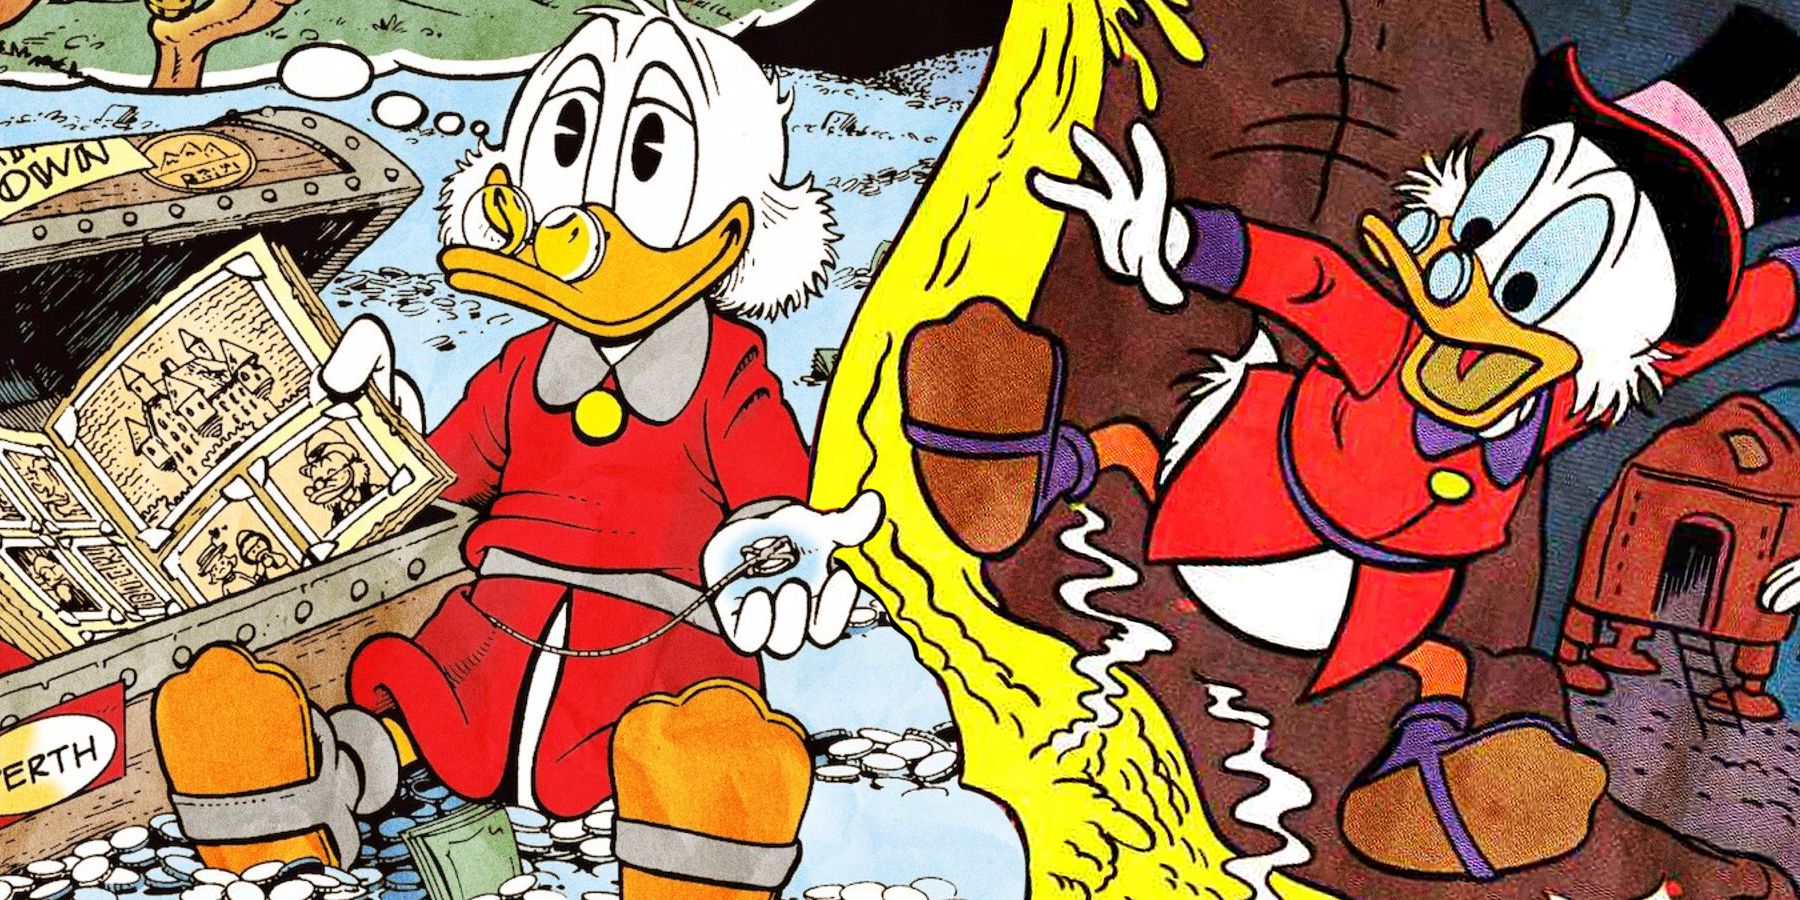 Disney Banning an Offensive Uncle Scrooge Character Was the Right Call